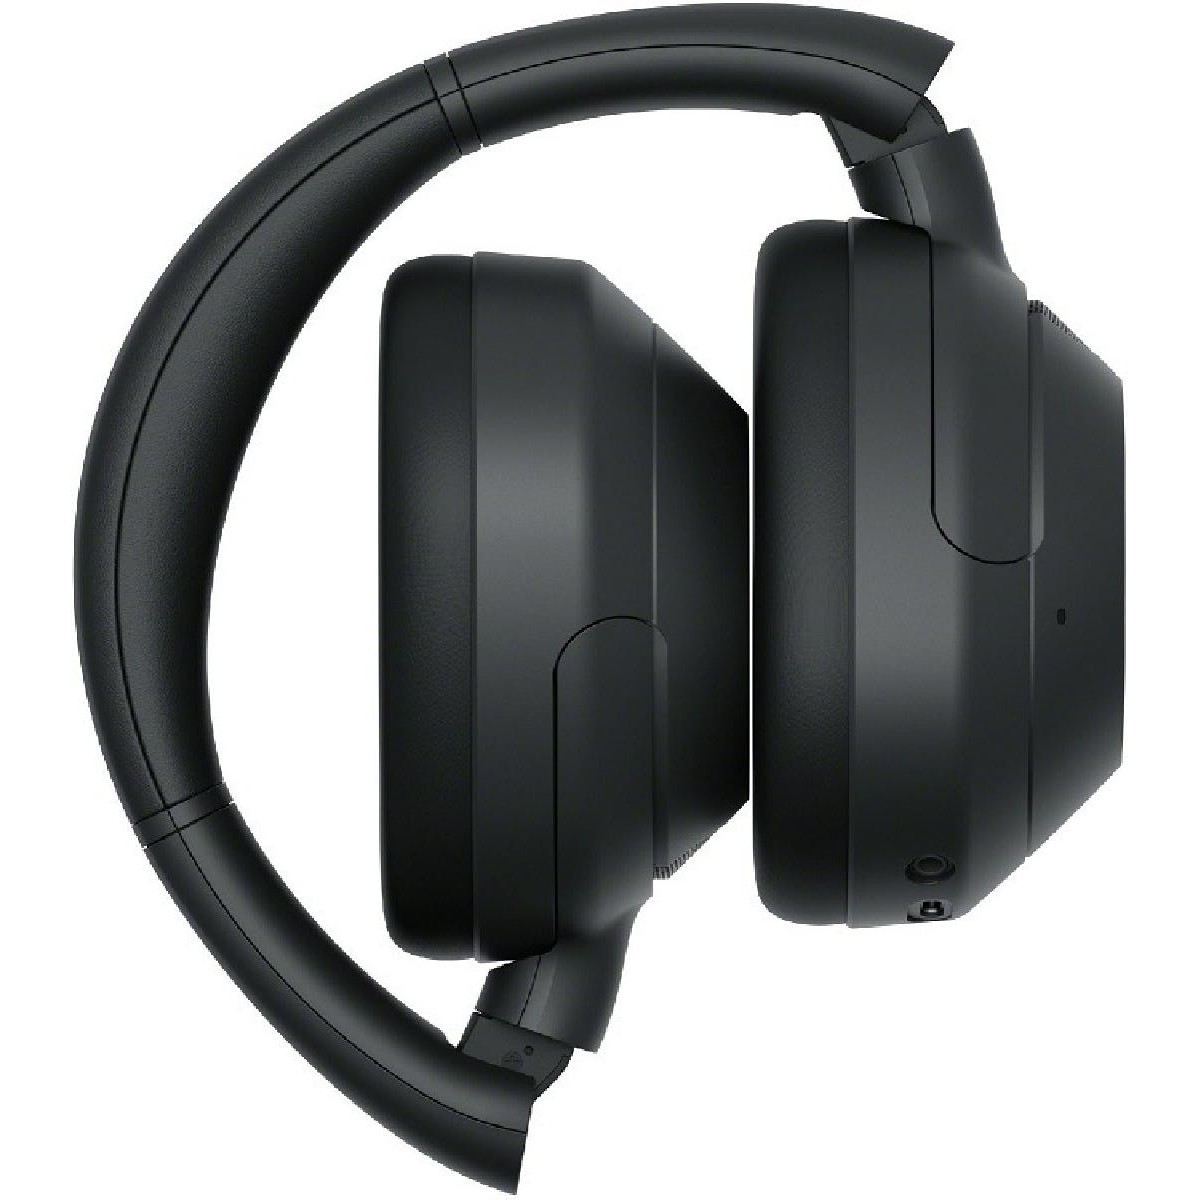 Sony WHULT900NB bluetooth headphones with ULT POWER SOUND & Noise Cancelling  black